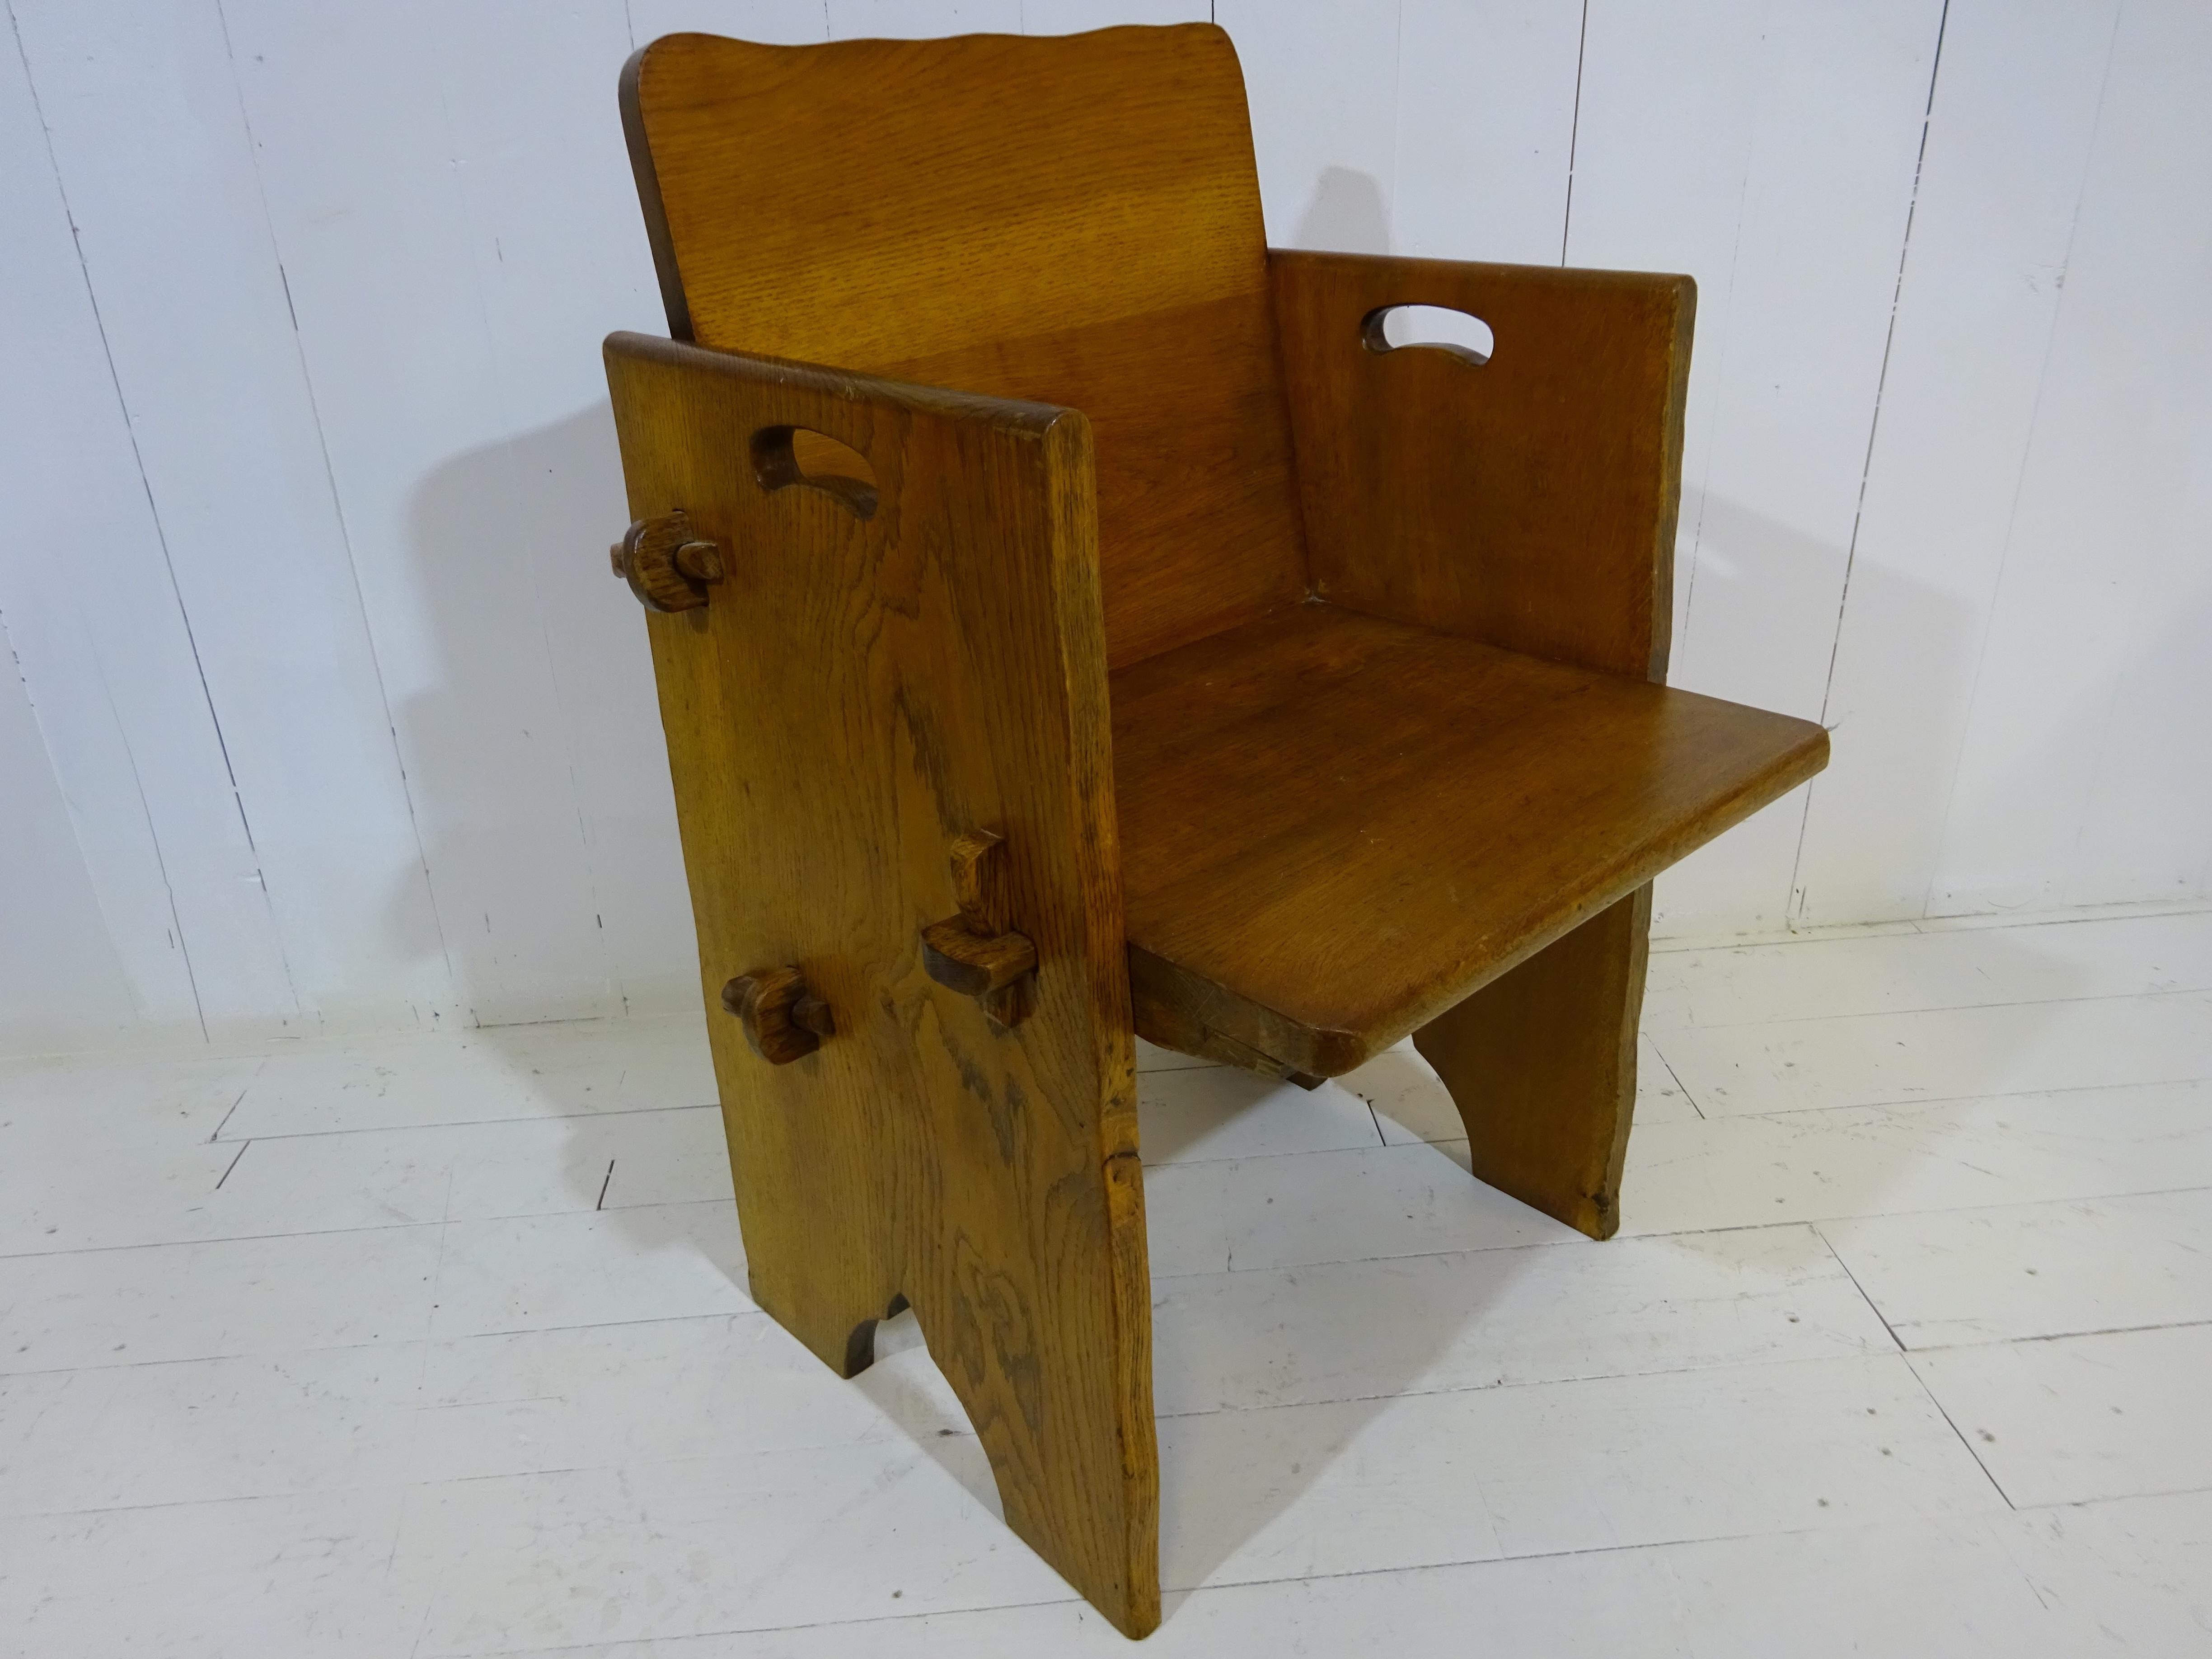 Altar or Monks Chair



Fabulous high quality church chair. 



Dated circa early 1900's the chair is a high quality item made from the finest oak and finished with a light varnish. Hand crafted the chair is solid, supportive and very